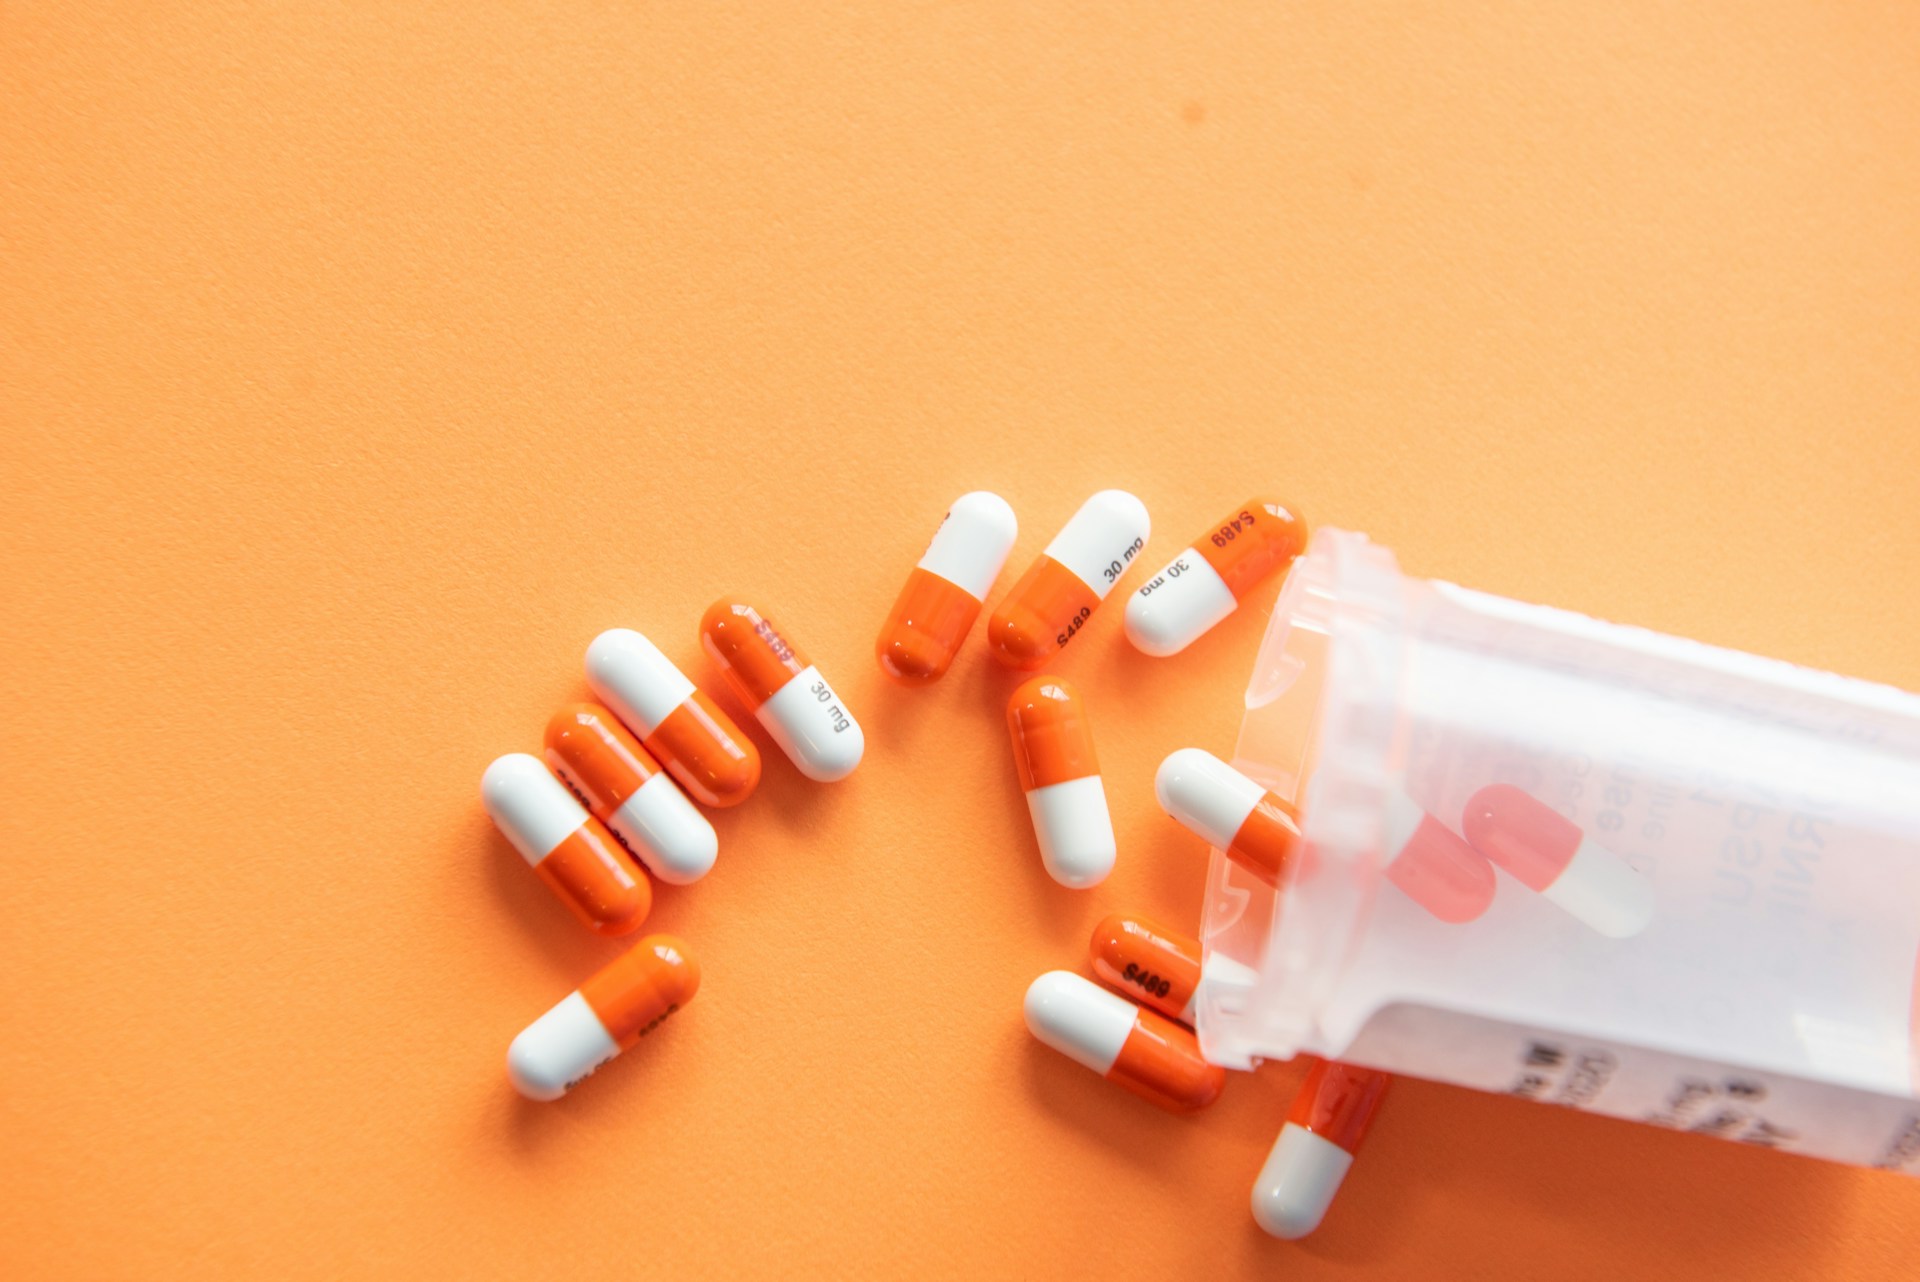 A pill bottle spills out orange and white capsules on an orange surface.